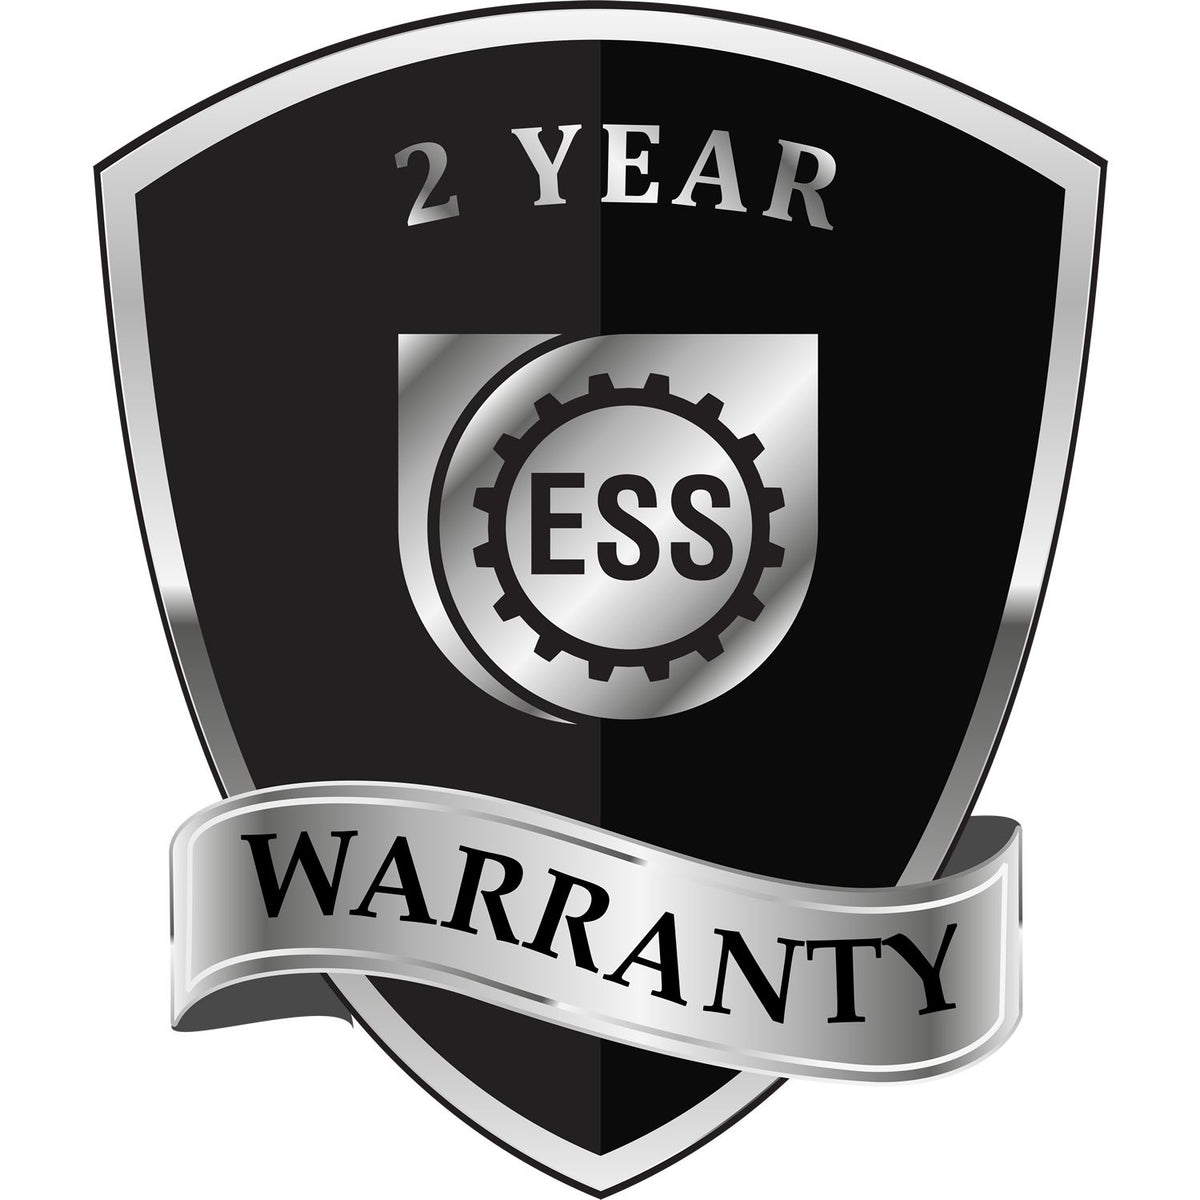 A badge or emblem showing a warranty icon for the Long Reach South Carolina PE Seal